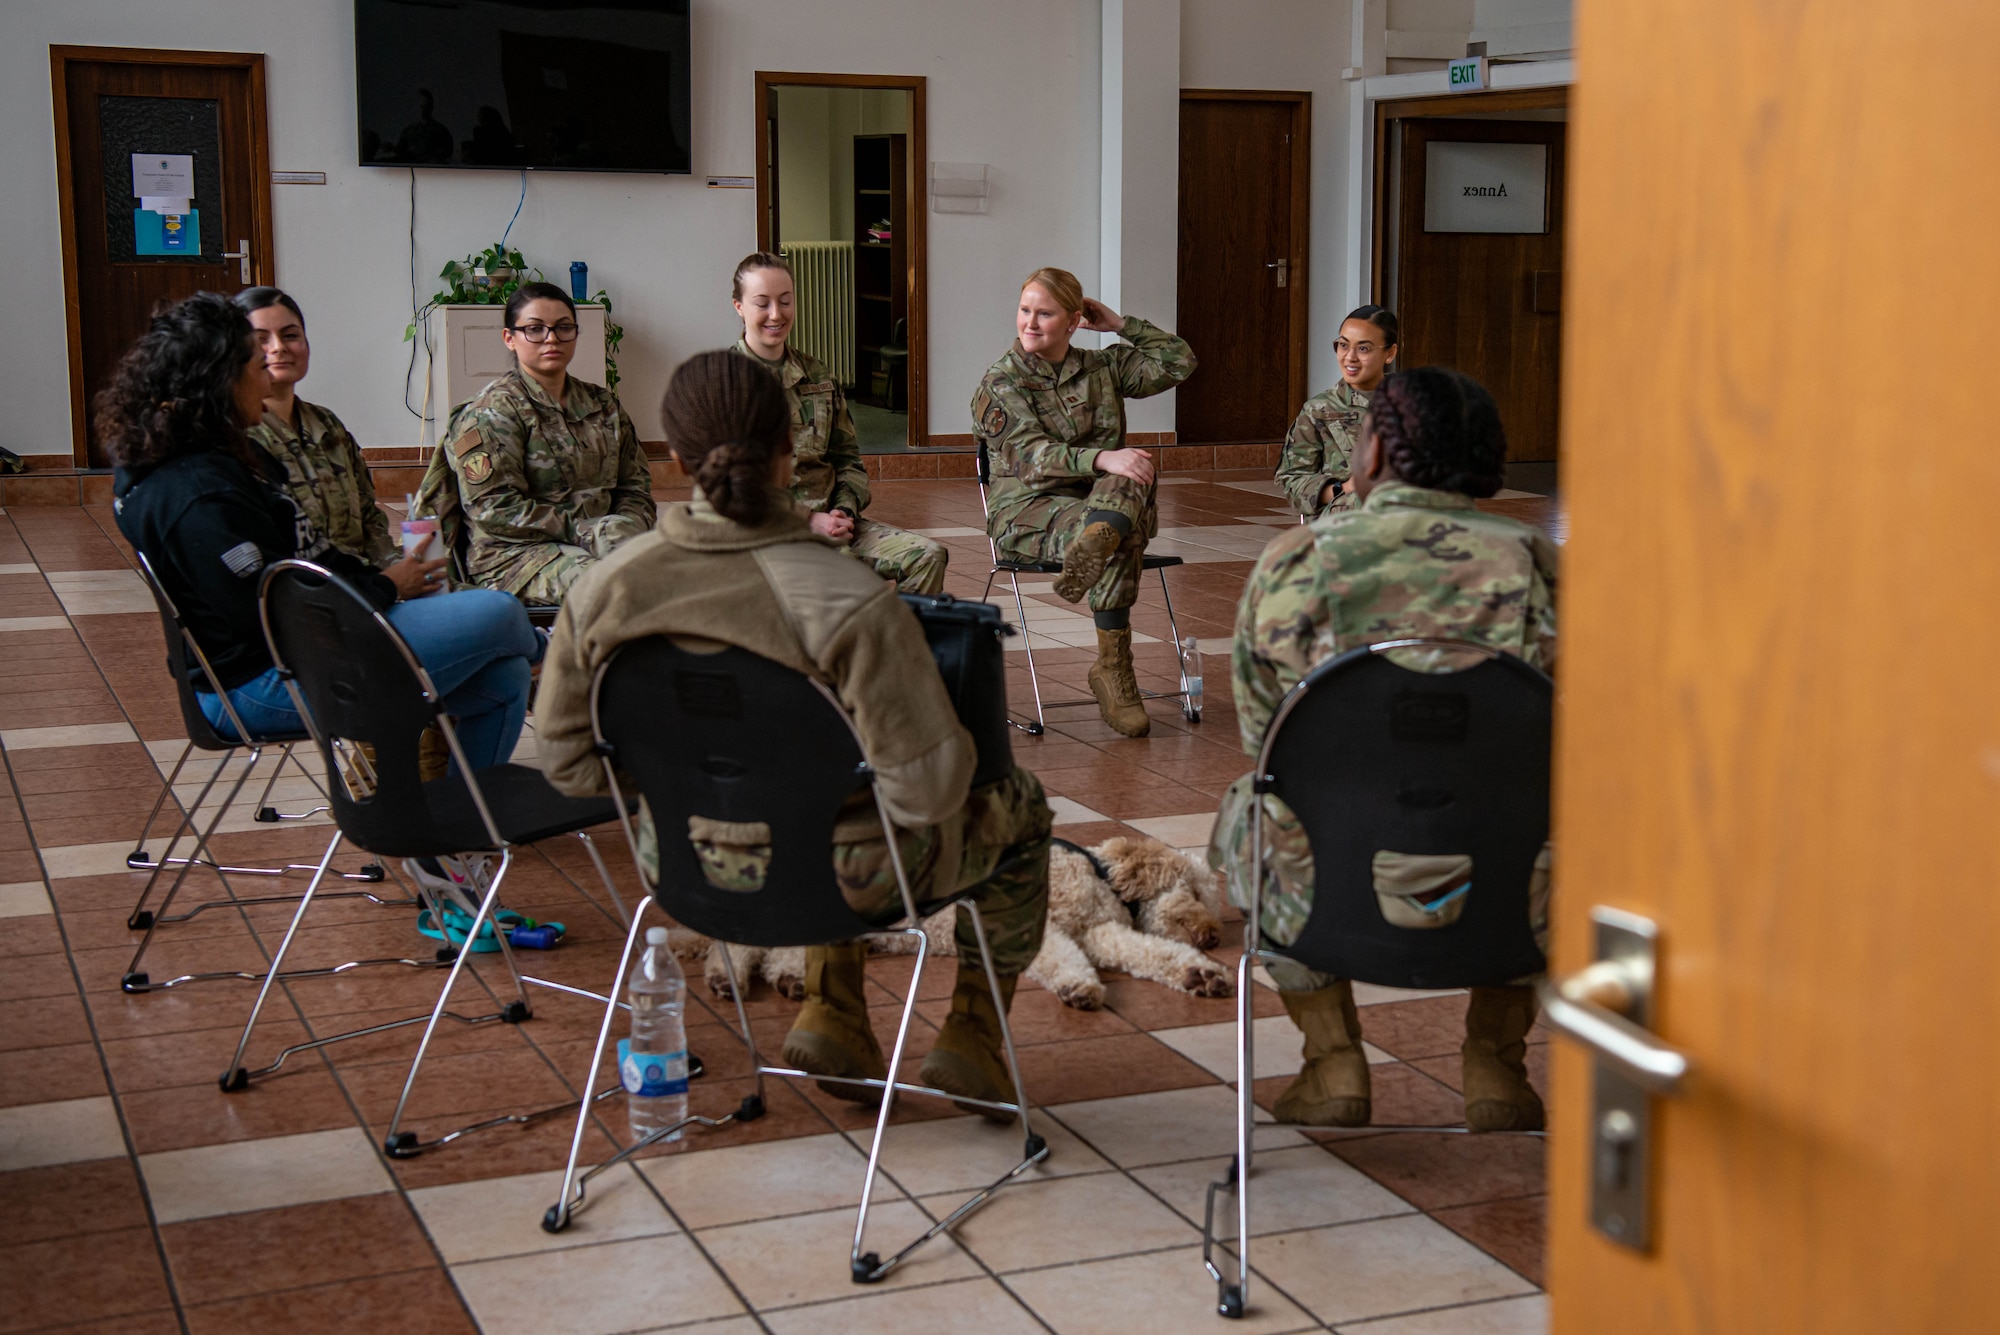 Airman sit and talk in a panel.